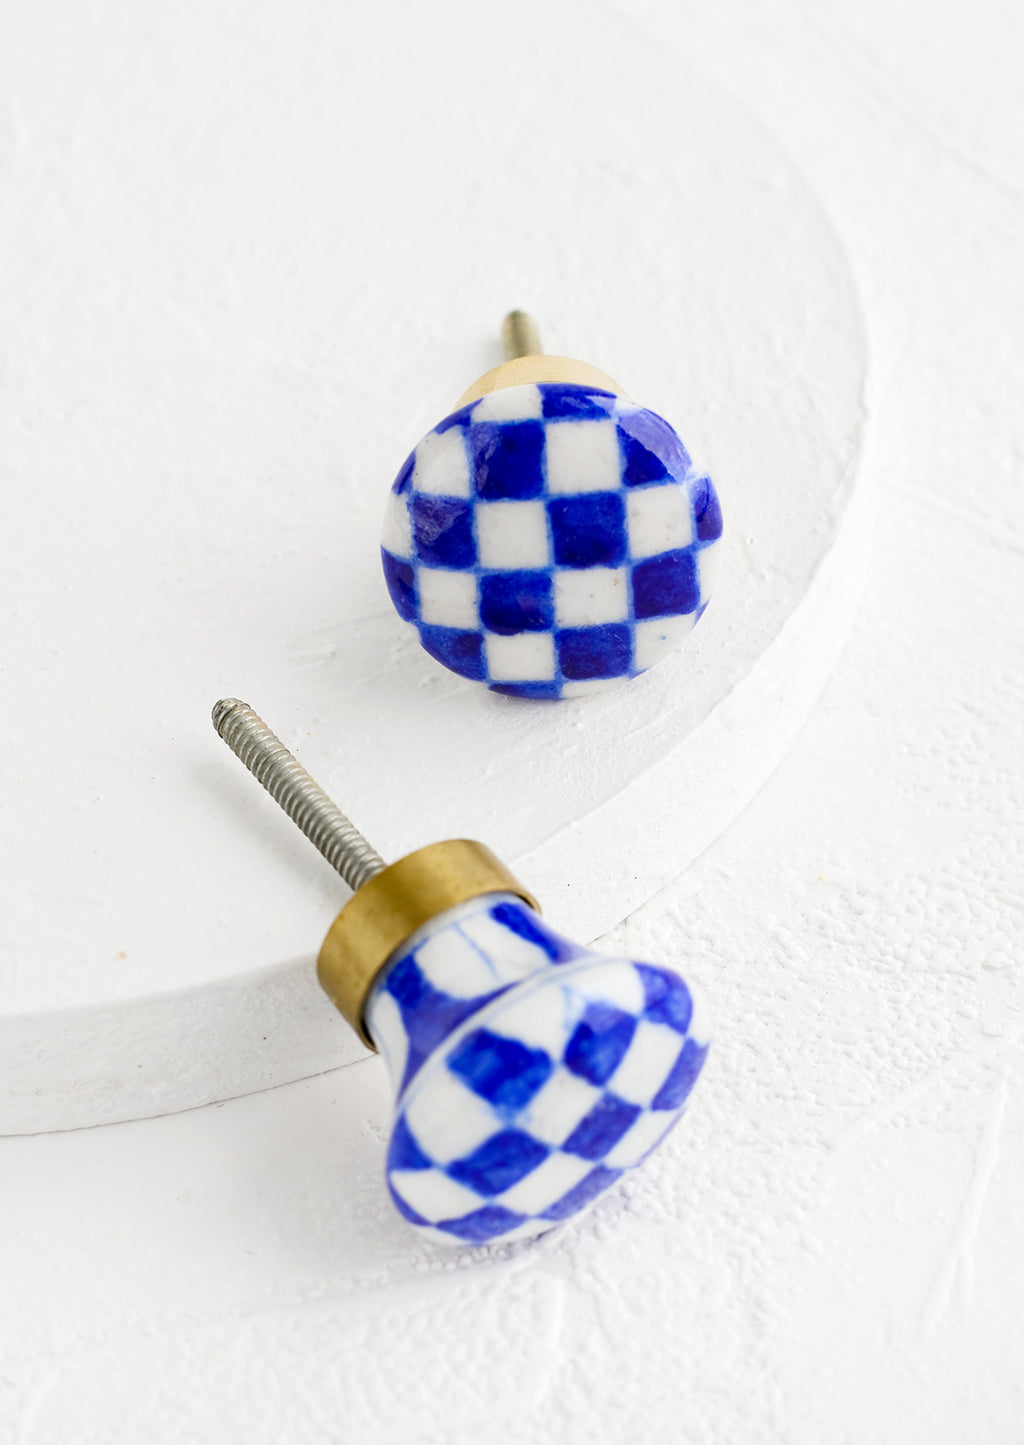 Blue Multi: Round ceramic cabinet knobs with blue and white checkered pattern